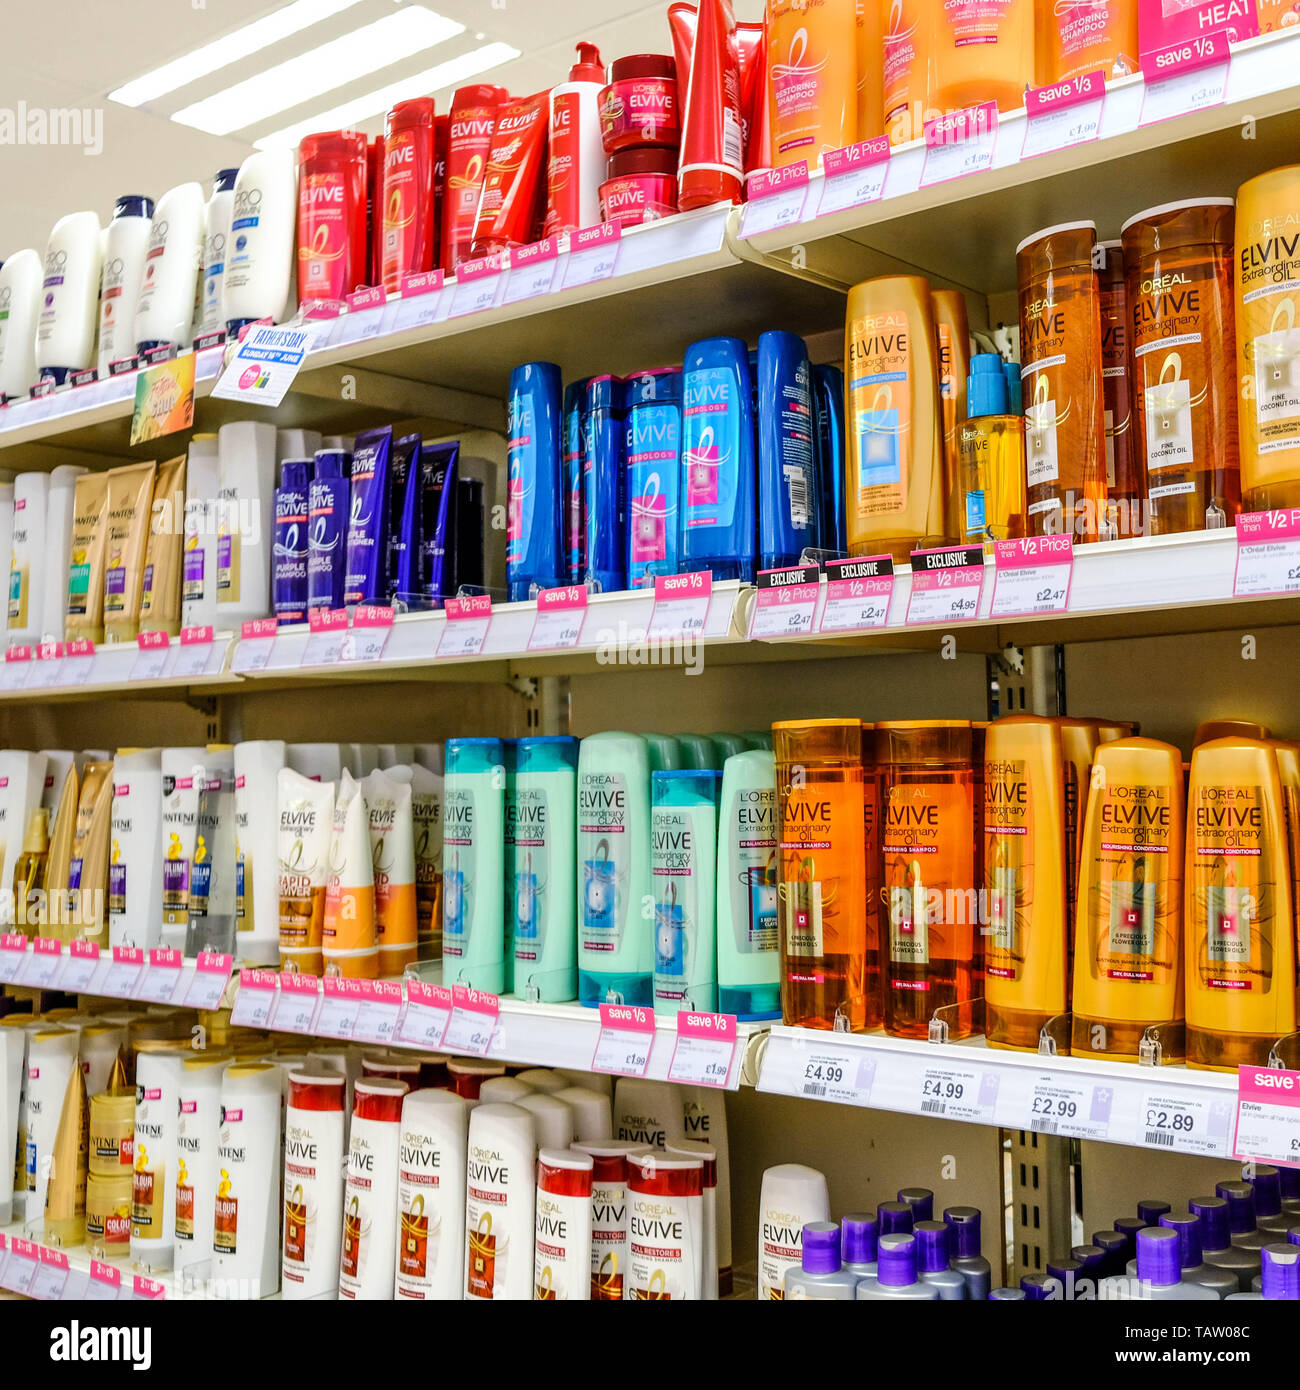 Selection of Elvive Hair Products Owned By L’Oreal in Paris France L’Oreal is The Worlds Largest Cosmetics Company With Revenues of 26.93 Billion Euro Stock Photo